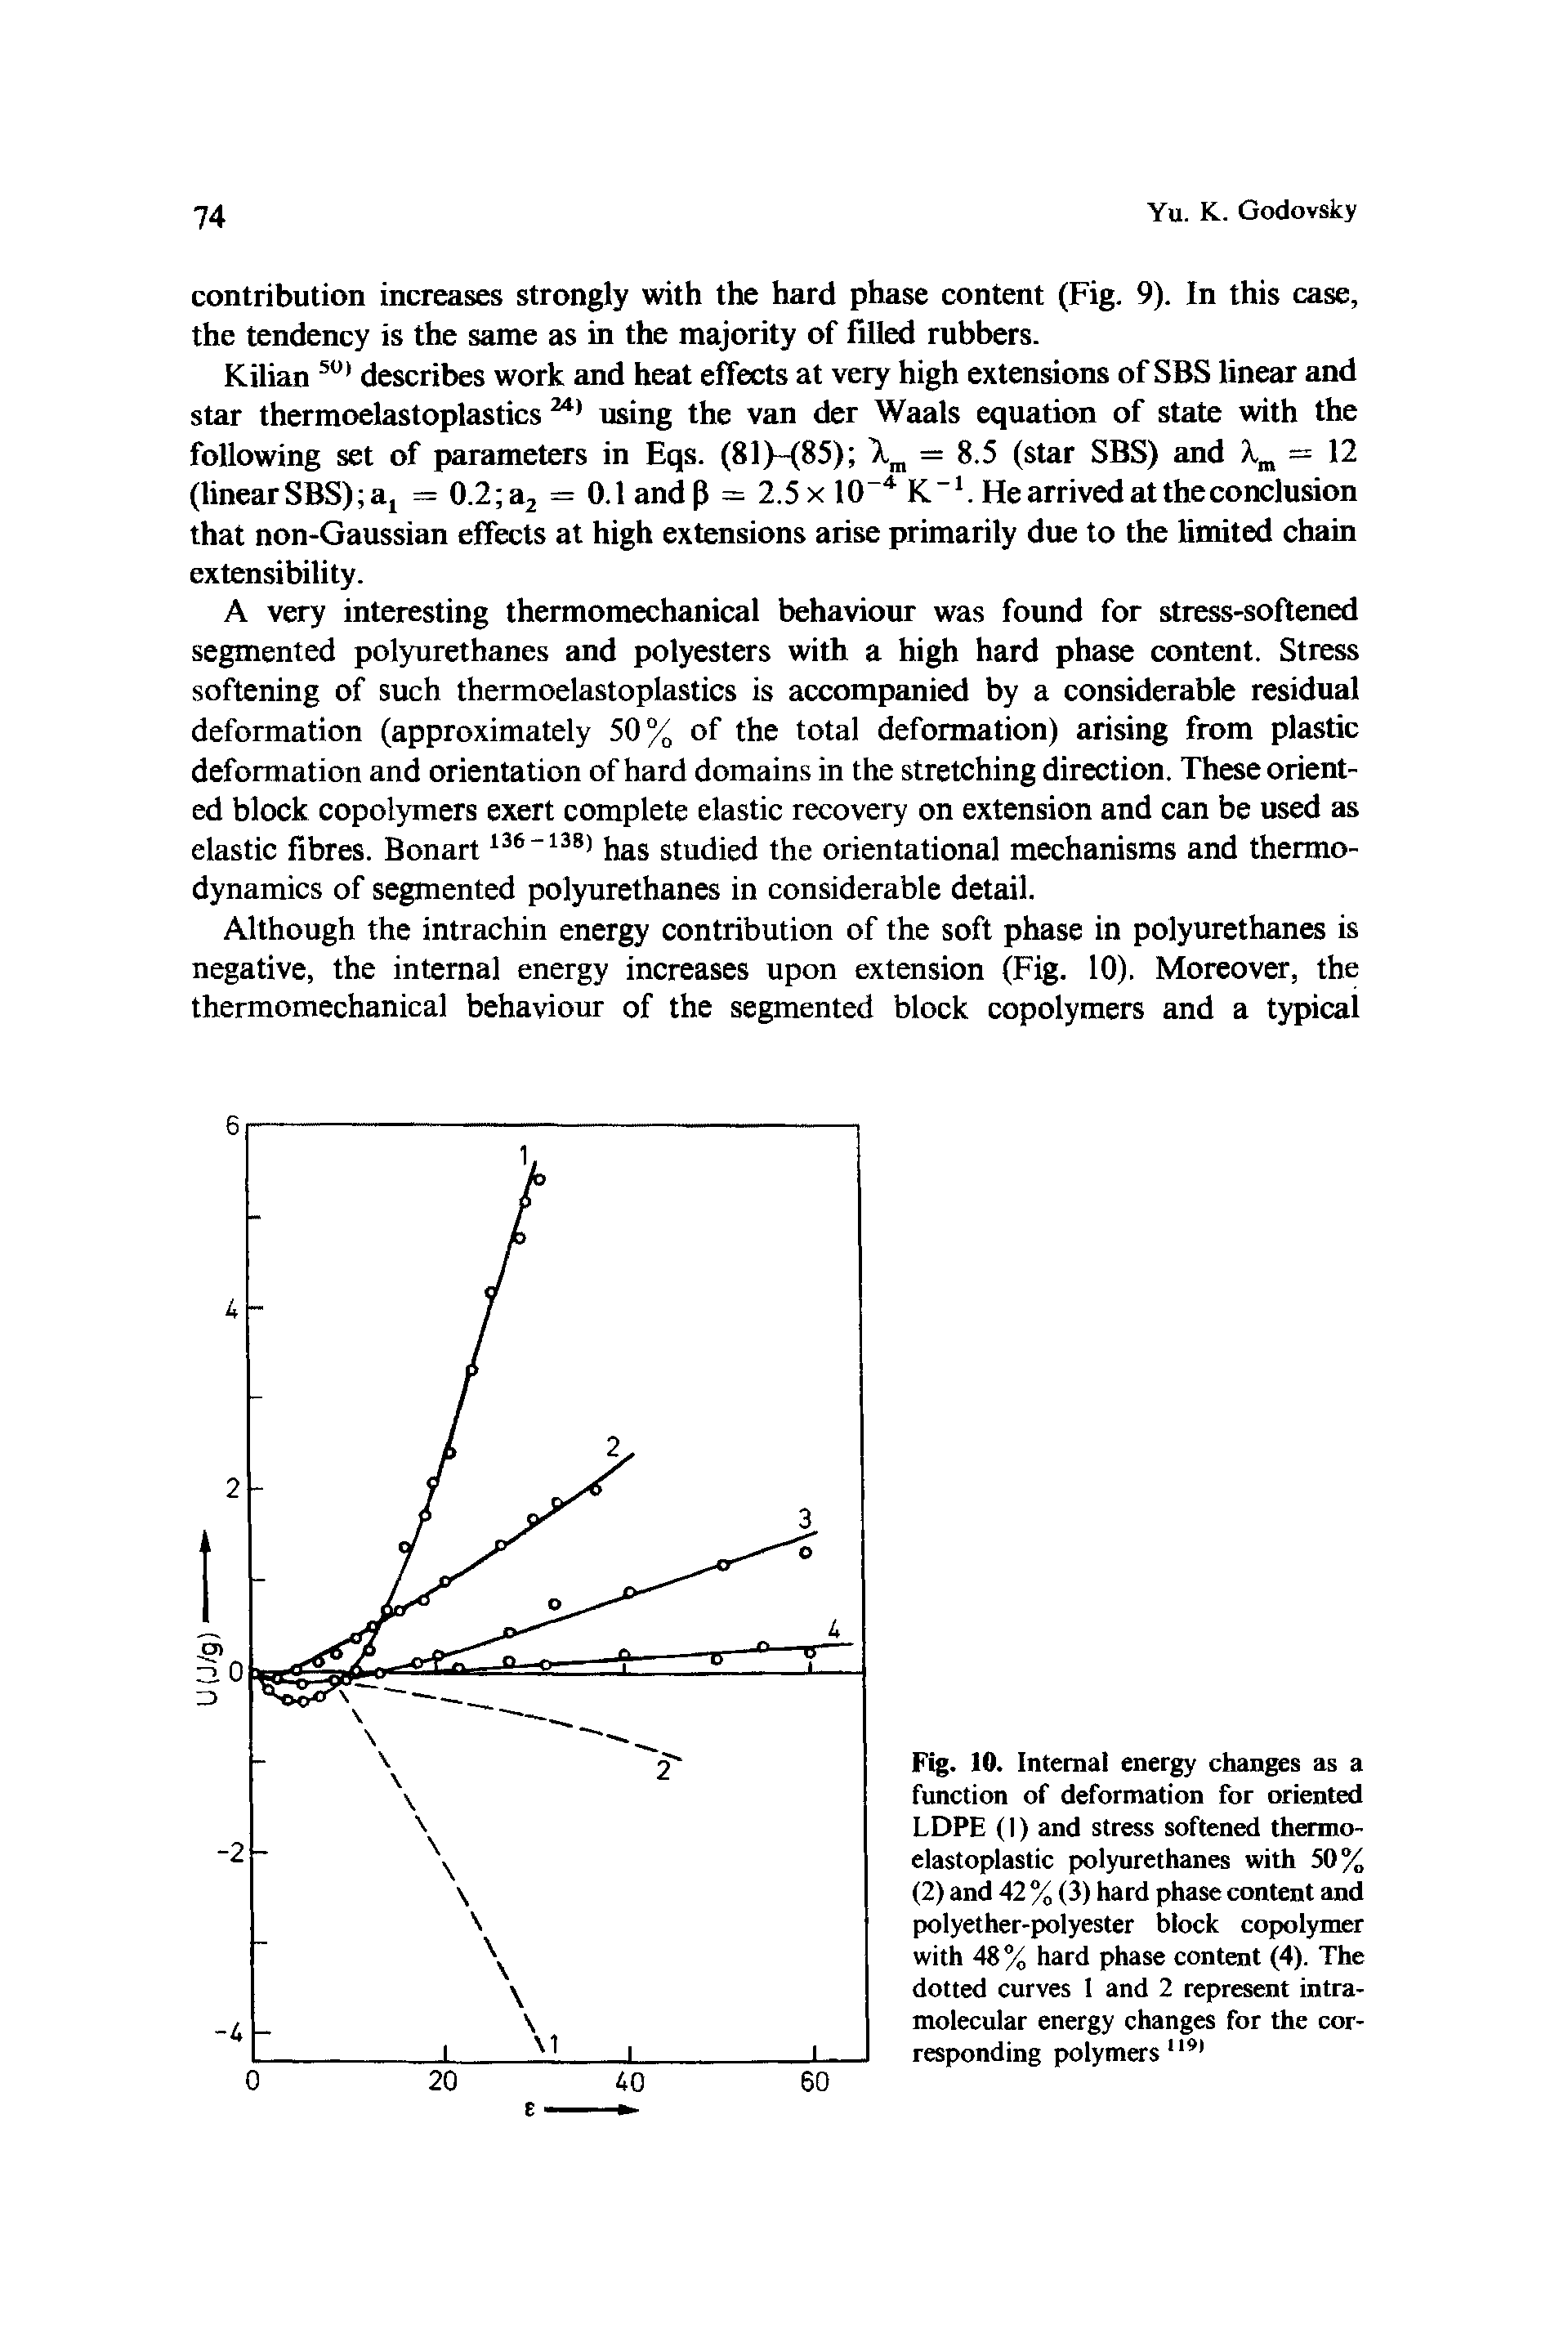 Fig. 10. Internal energy changes as a function of deformation for oriented LDPE (I) and stress softened thermo-elastoplastic polyurethanes with 50% (2) and 42 % (3) hard phase content and polyether-polyester block copolymer with 48% hard phase content (4). The dotted curves 1 and 2 represent intramolecular energy changes for the corresponding polymers119 ...